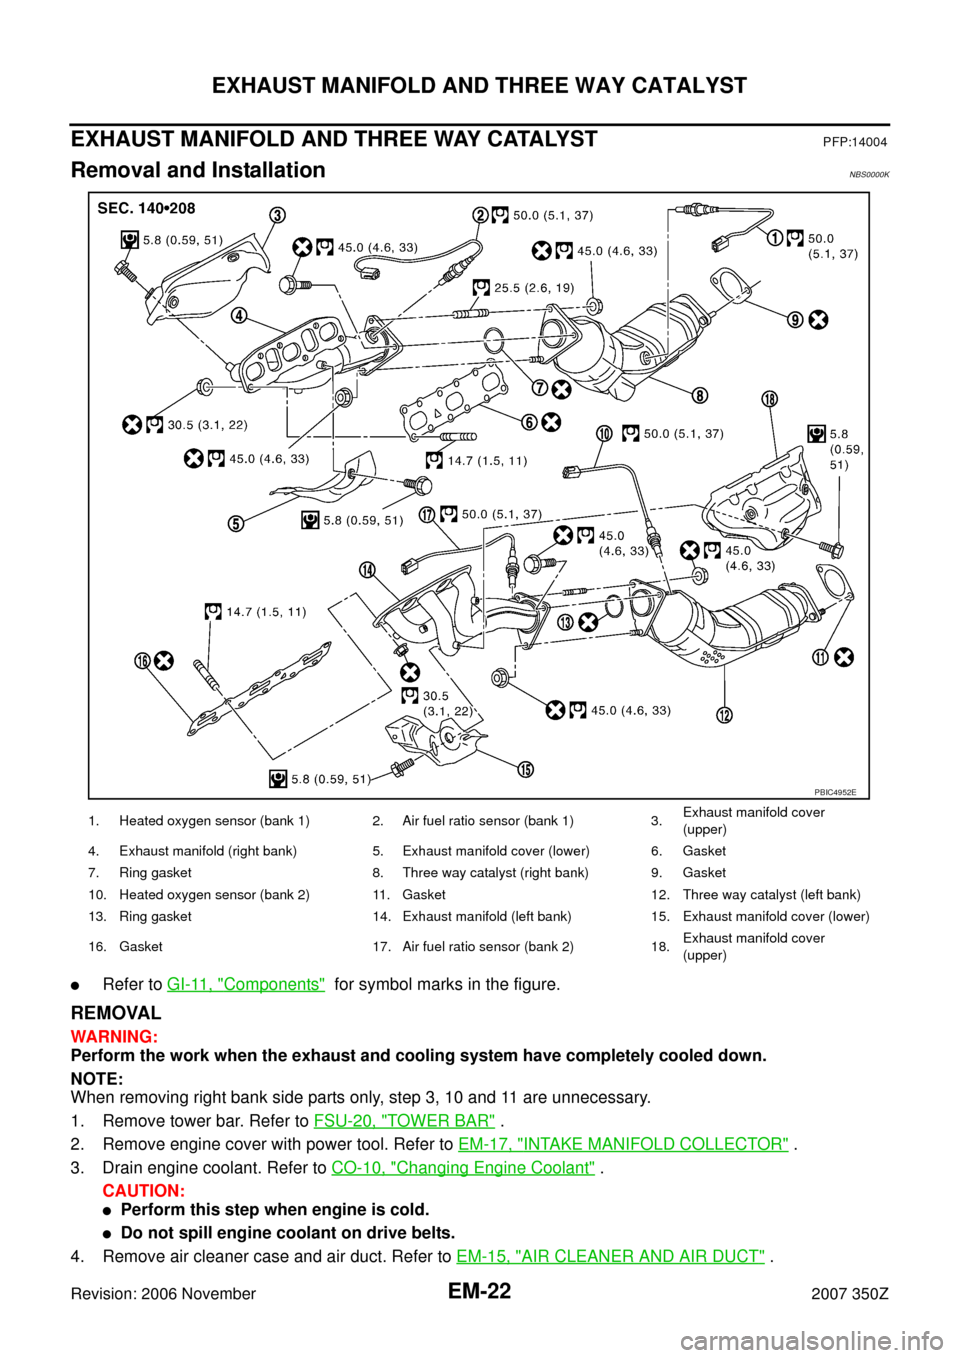 NISSAN 350Z 2007 Z33 Engine Mechanical Workshop Manual EM-22
EXHAUST MANIFOLD AND THREE WAY CATALYST
Revision: 2006 November2007 350Z
EXHAUST MANIFOLD AND THREE WAY CATALYSTPFP:14004
Removal and InstallationNBS0000K
Refer to GI-11, "Components"  for symb